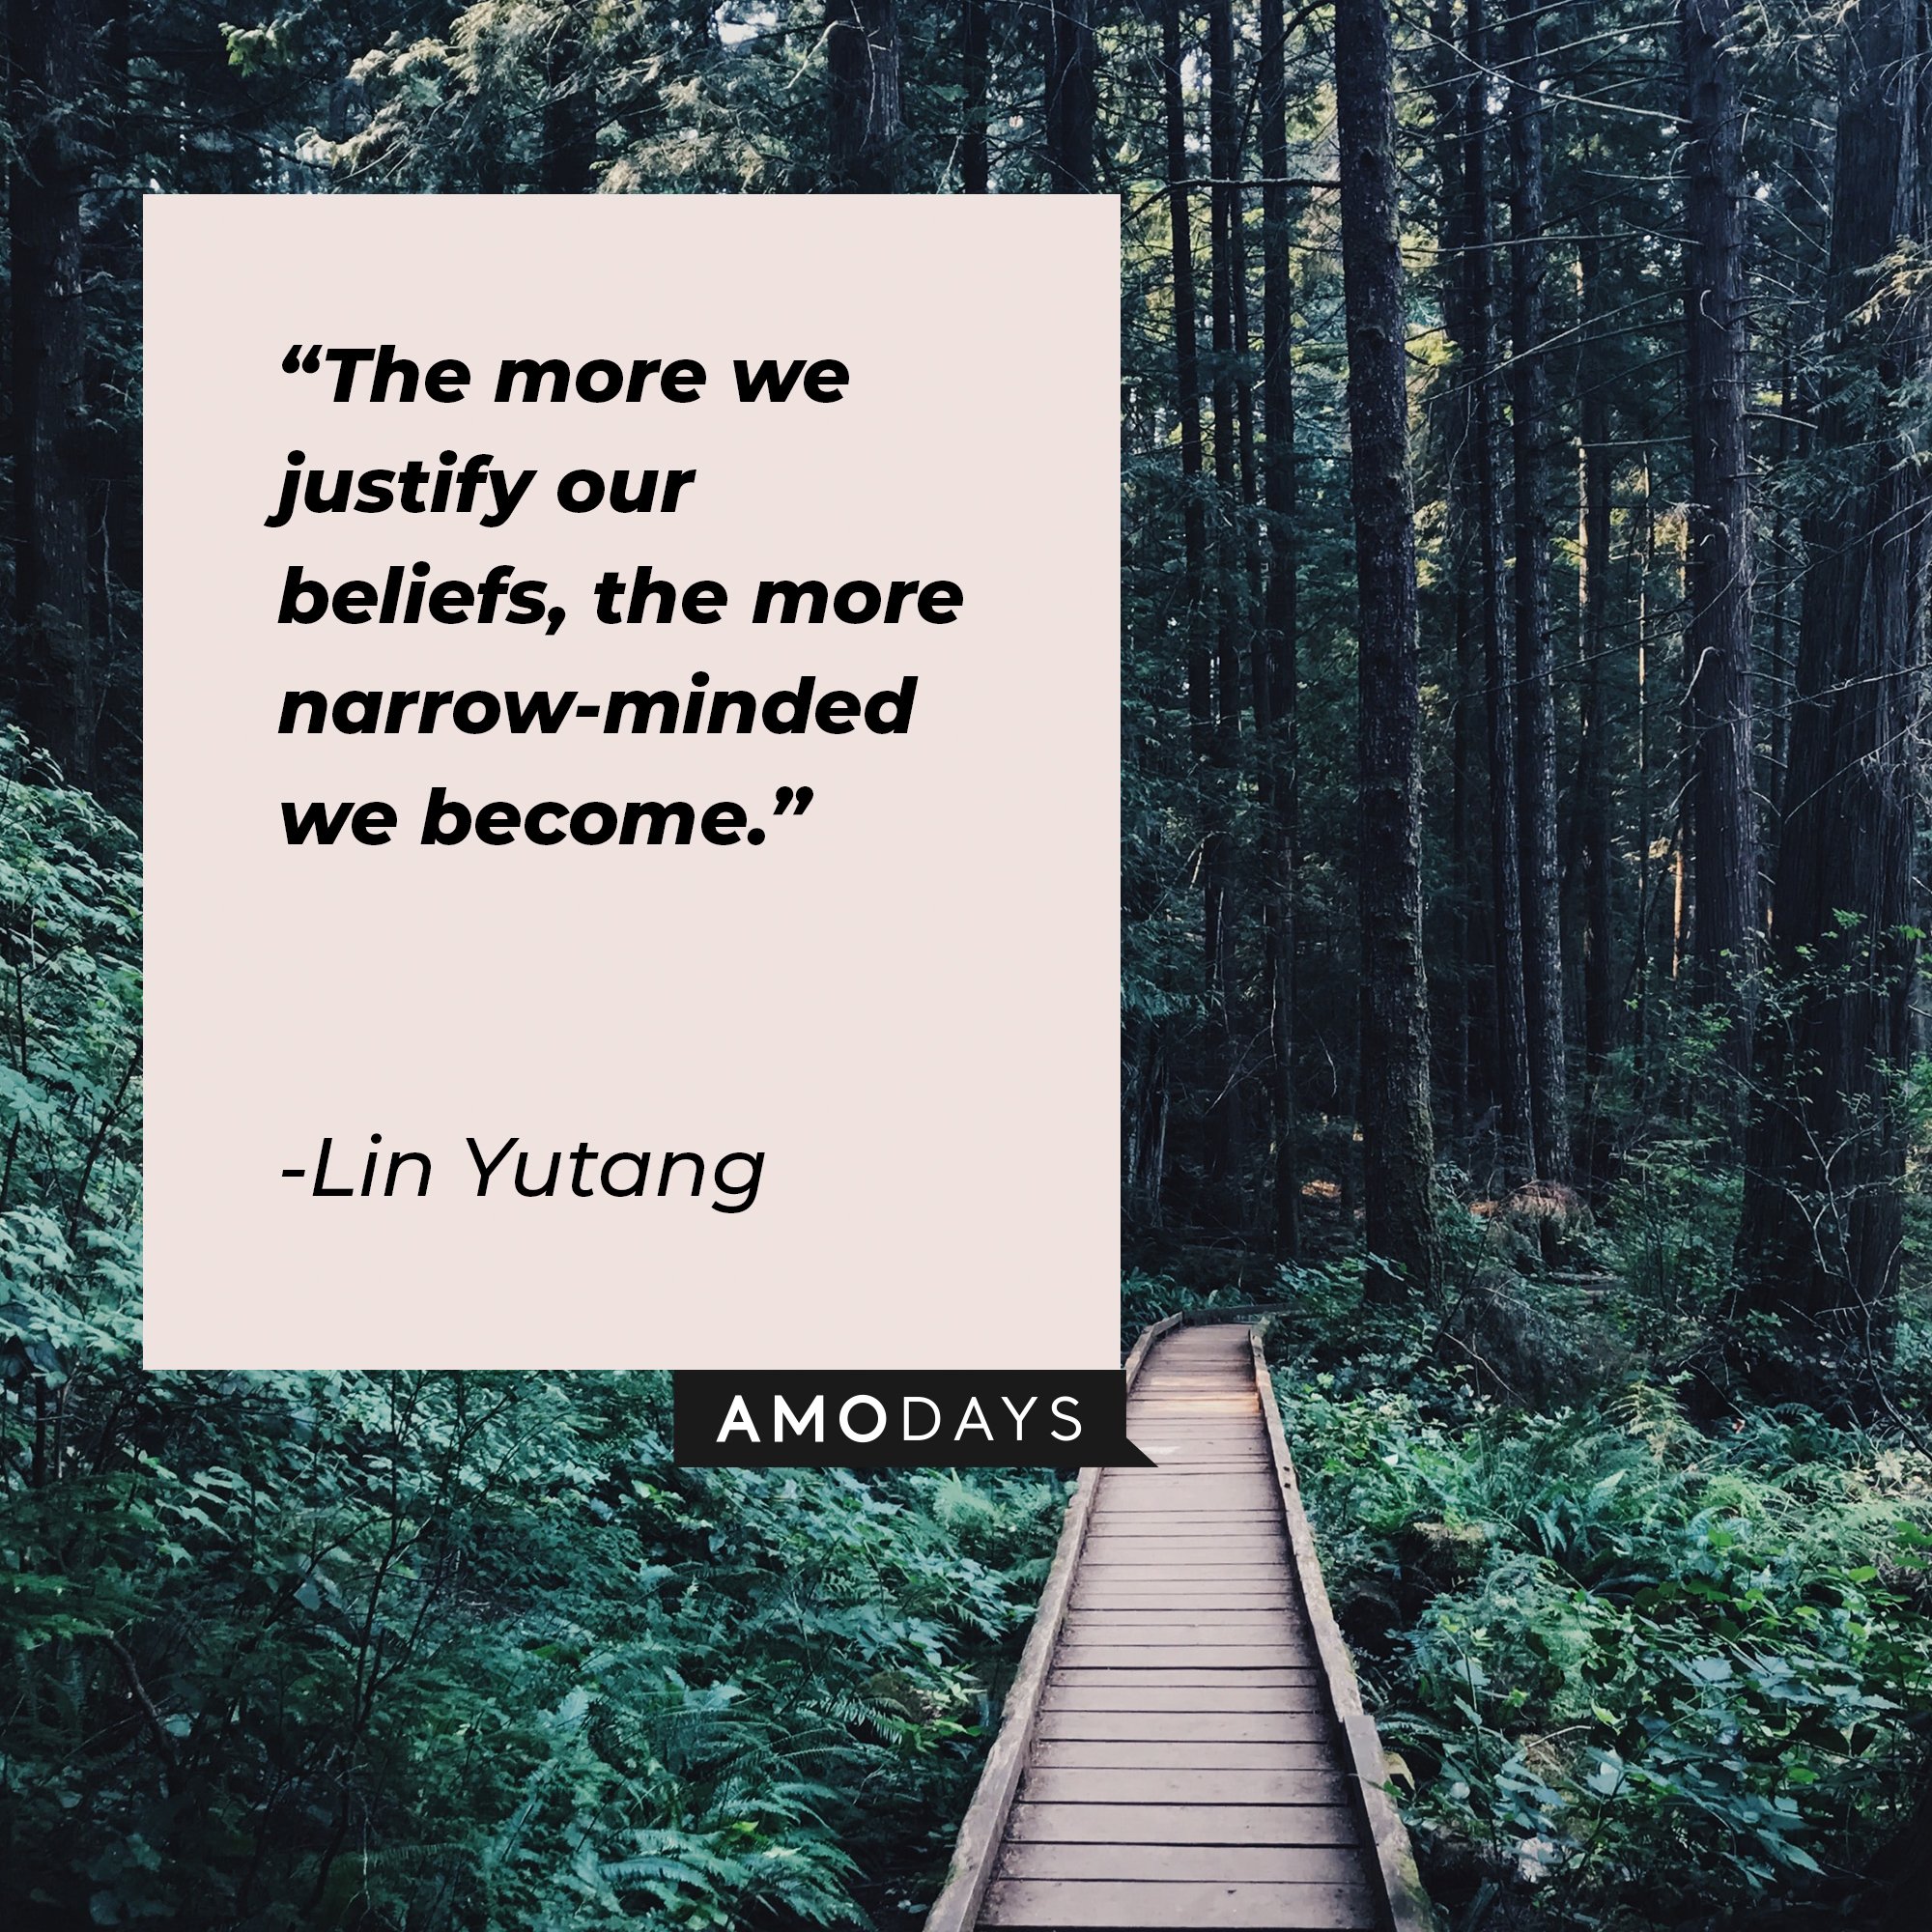 Lin Yutang's quote: "The more we justify our beliefs, the more narrow-minded we become." | Image: AmoDays